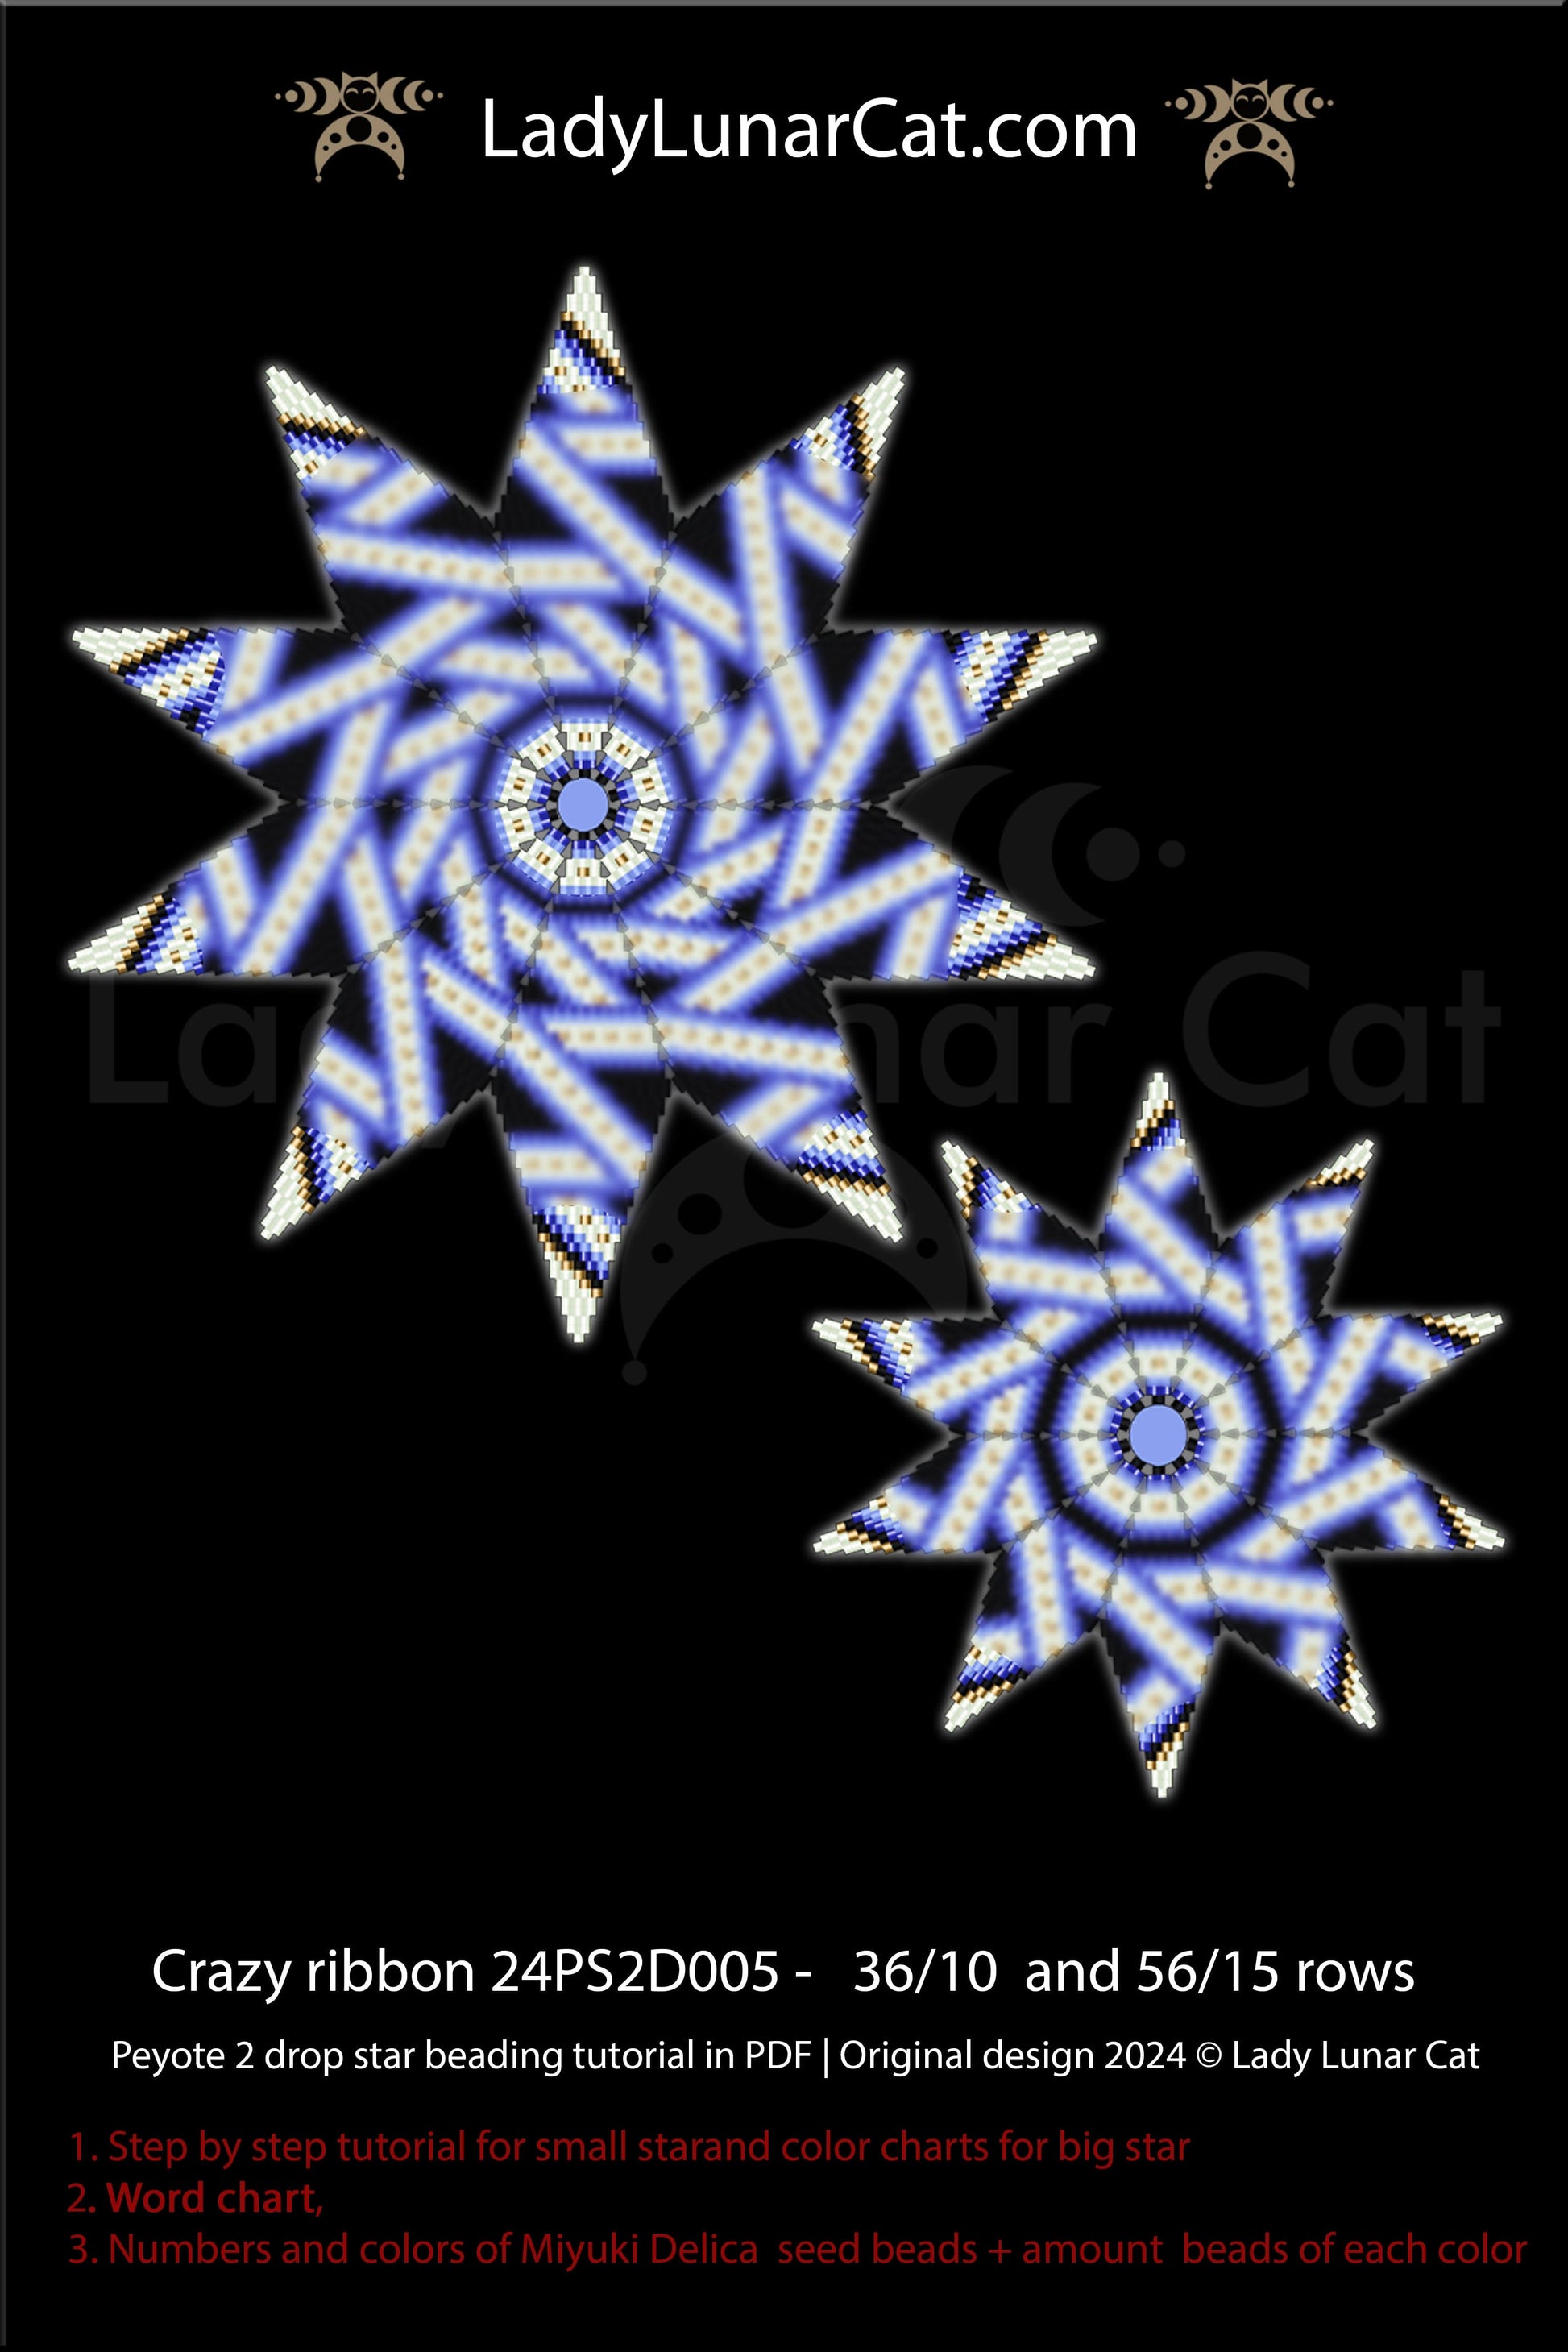 Peyote 2 drop star pattern for beading - Rainbow  56/15 rows and 32/ 7 rows LadyLunarCat